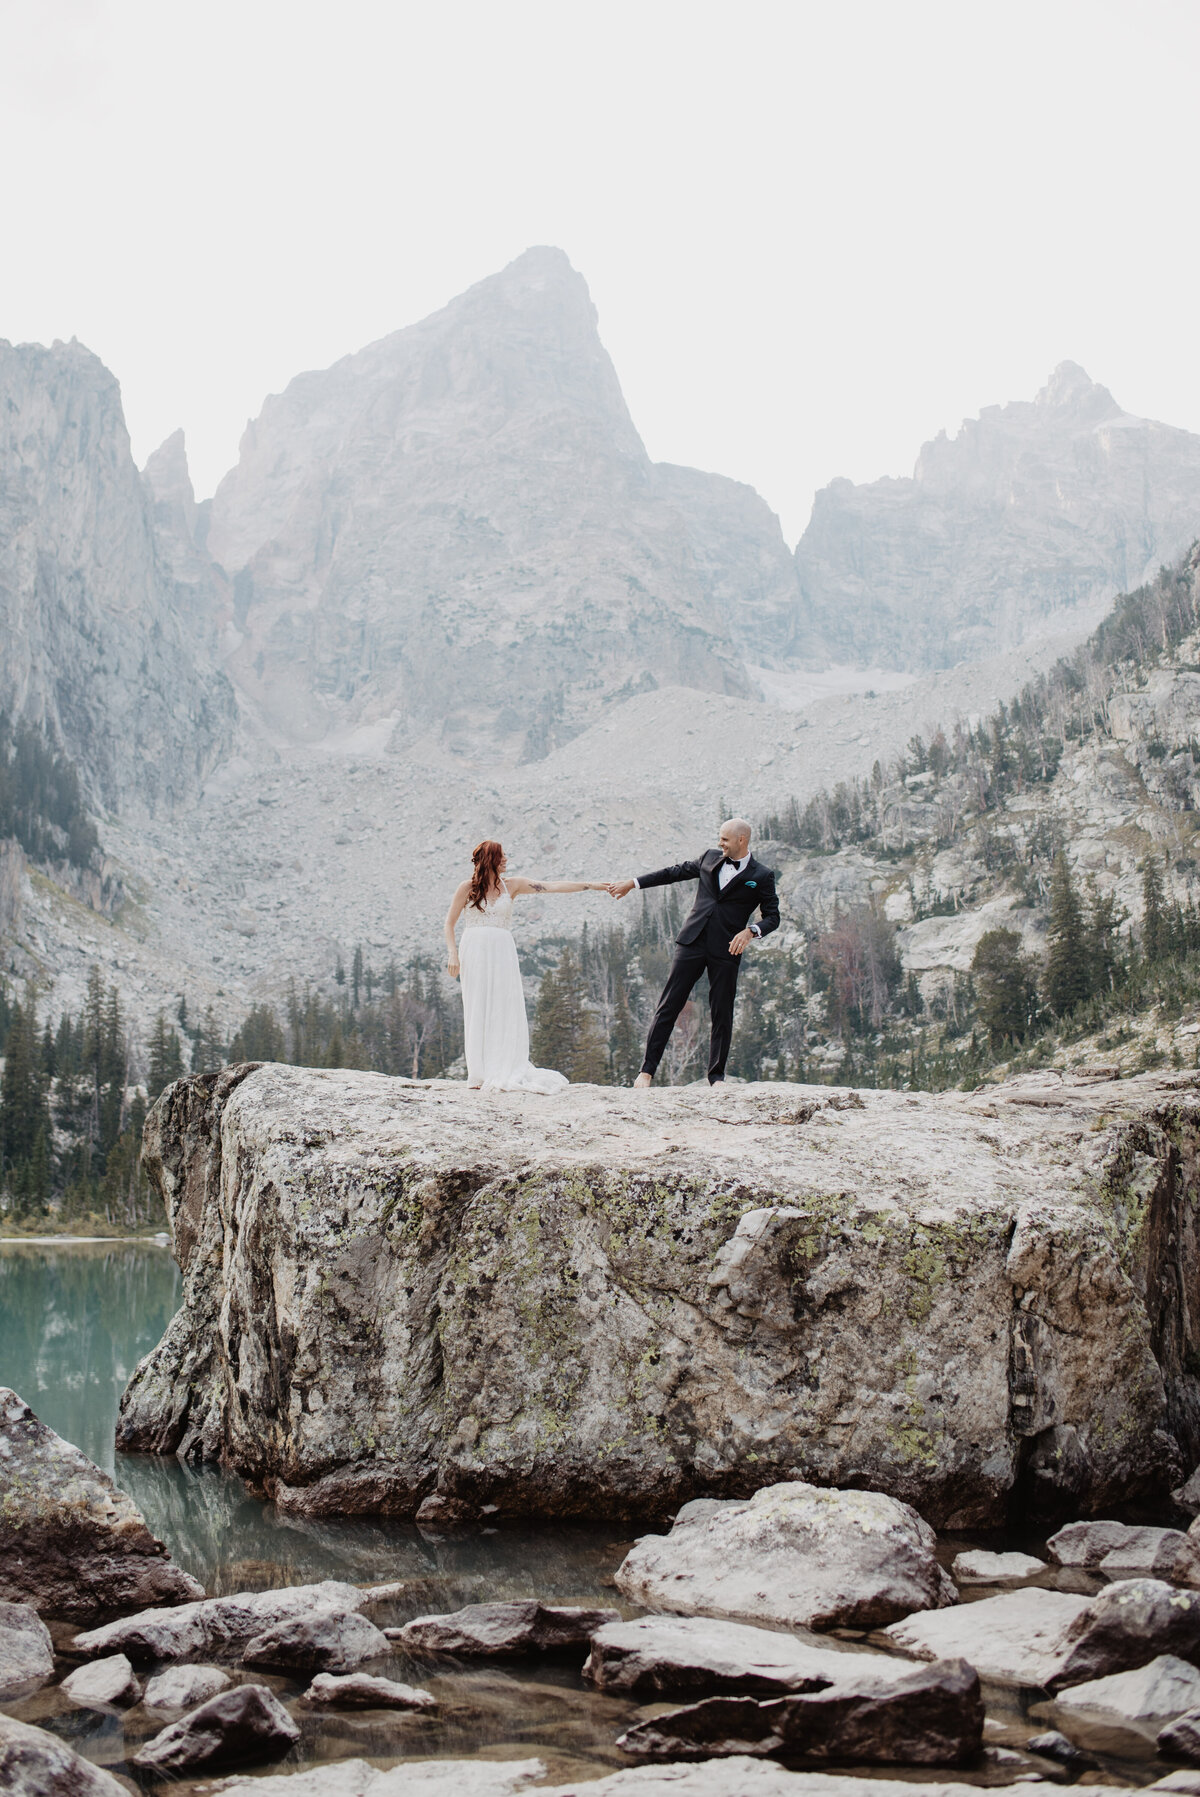 Jackson Hole photographers capture bride and groom pulling one another on boulder